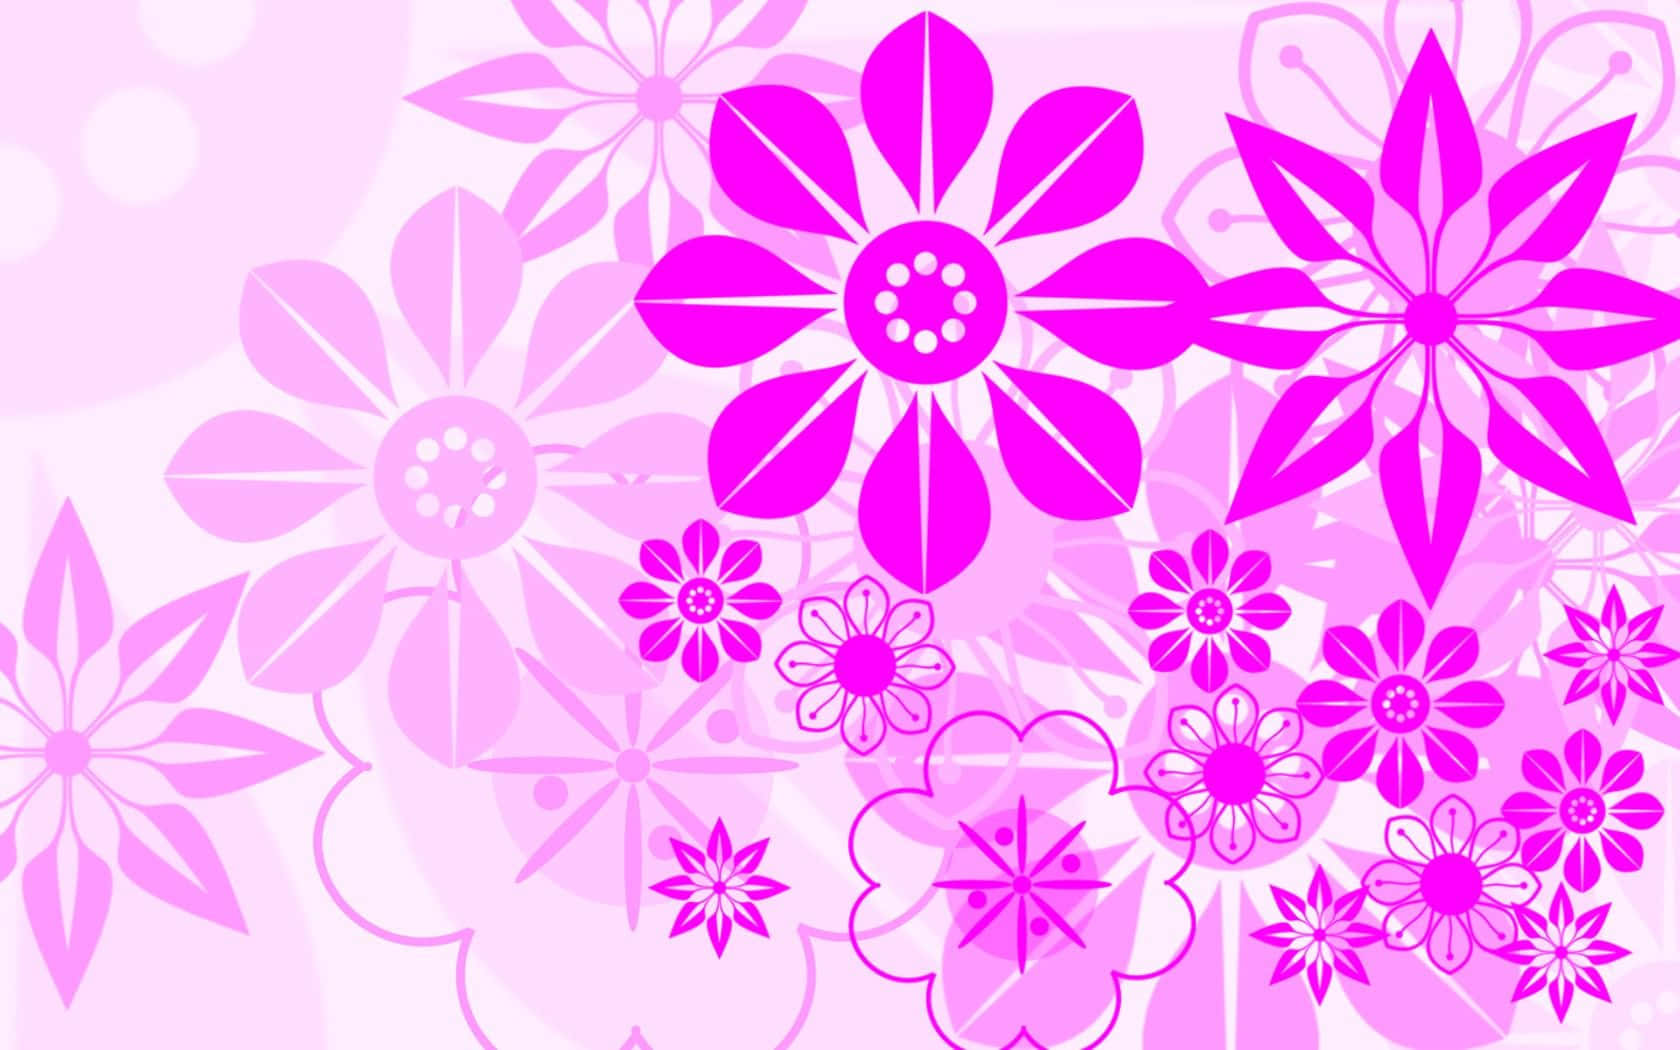 Soft and Sweet White and Pink Background